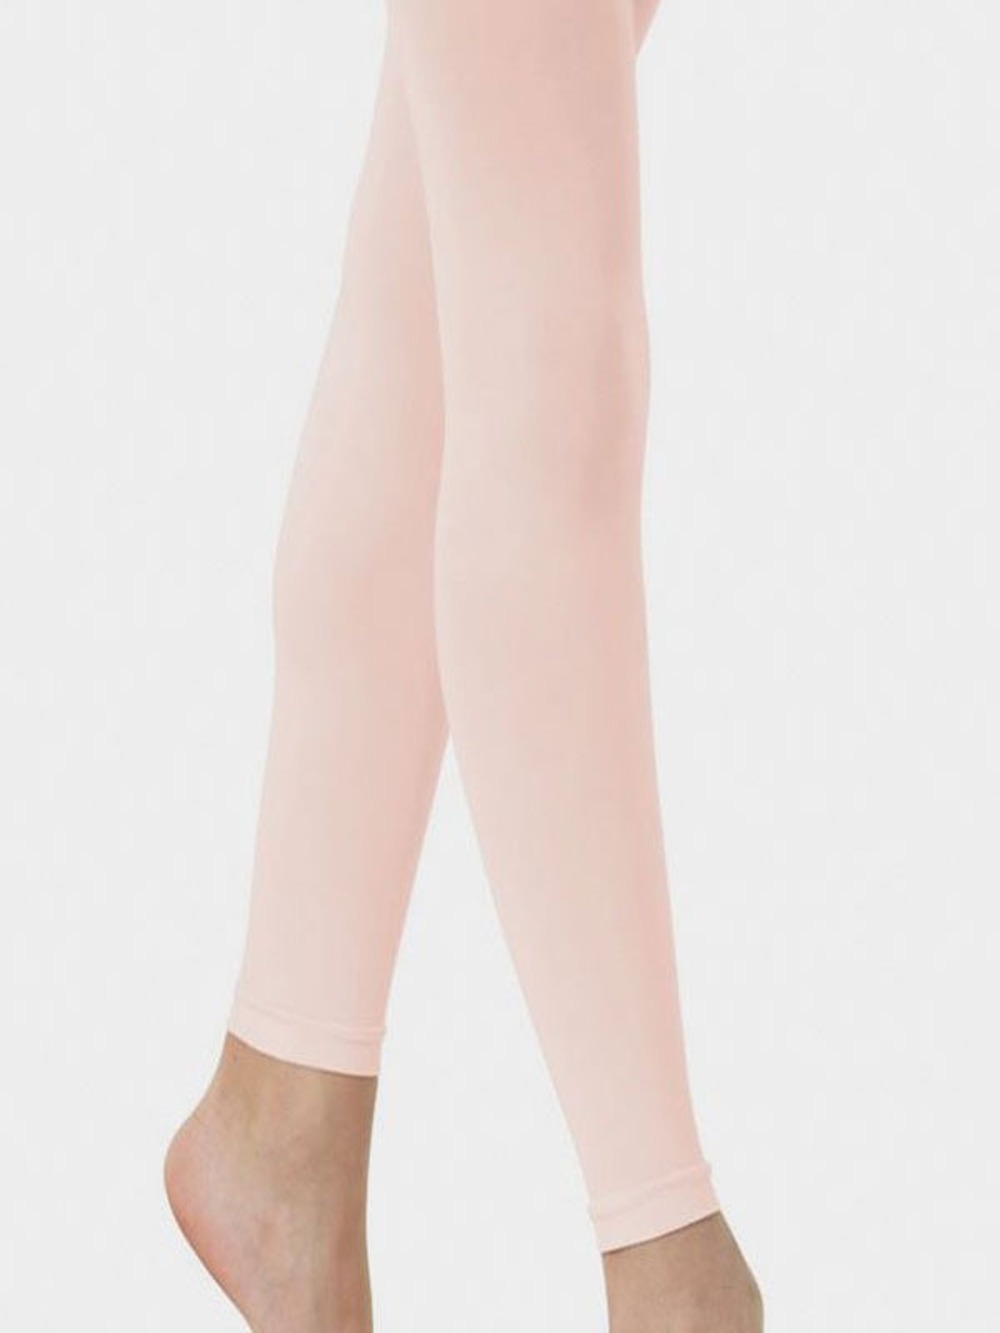 1917 ULTRA SOFT Contemporary Dance Tights - PINK